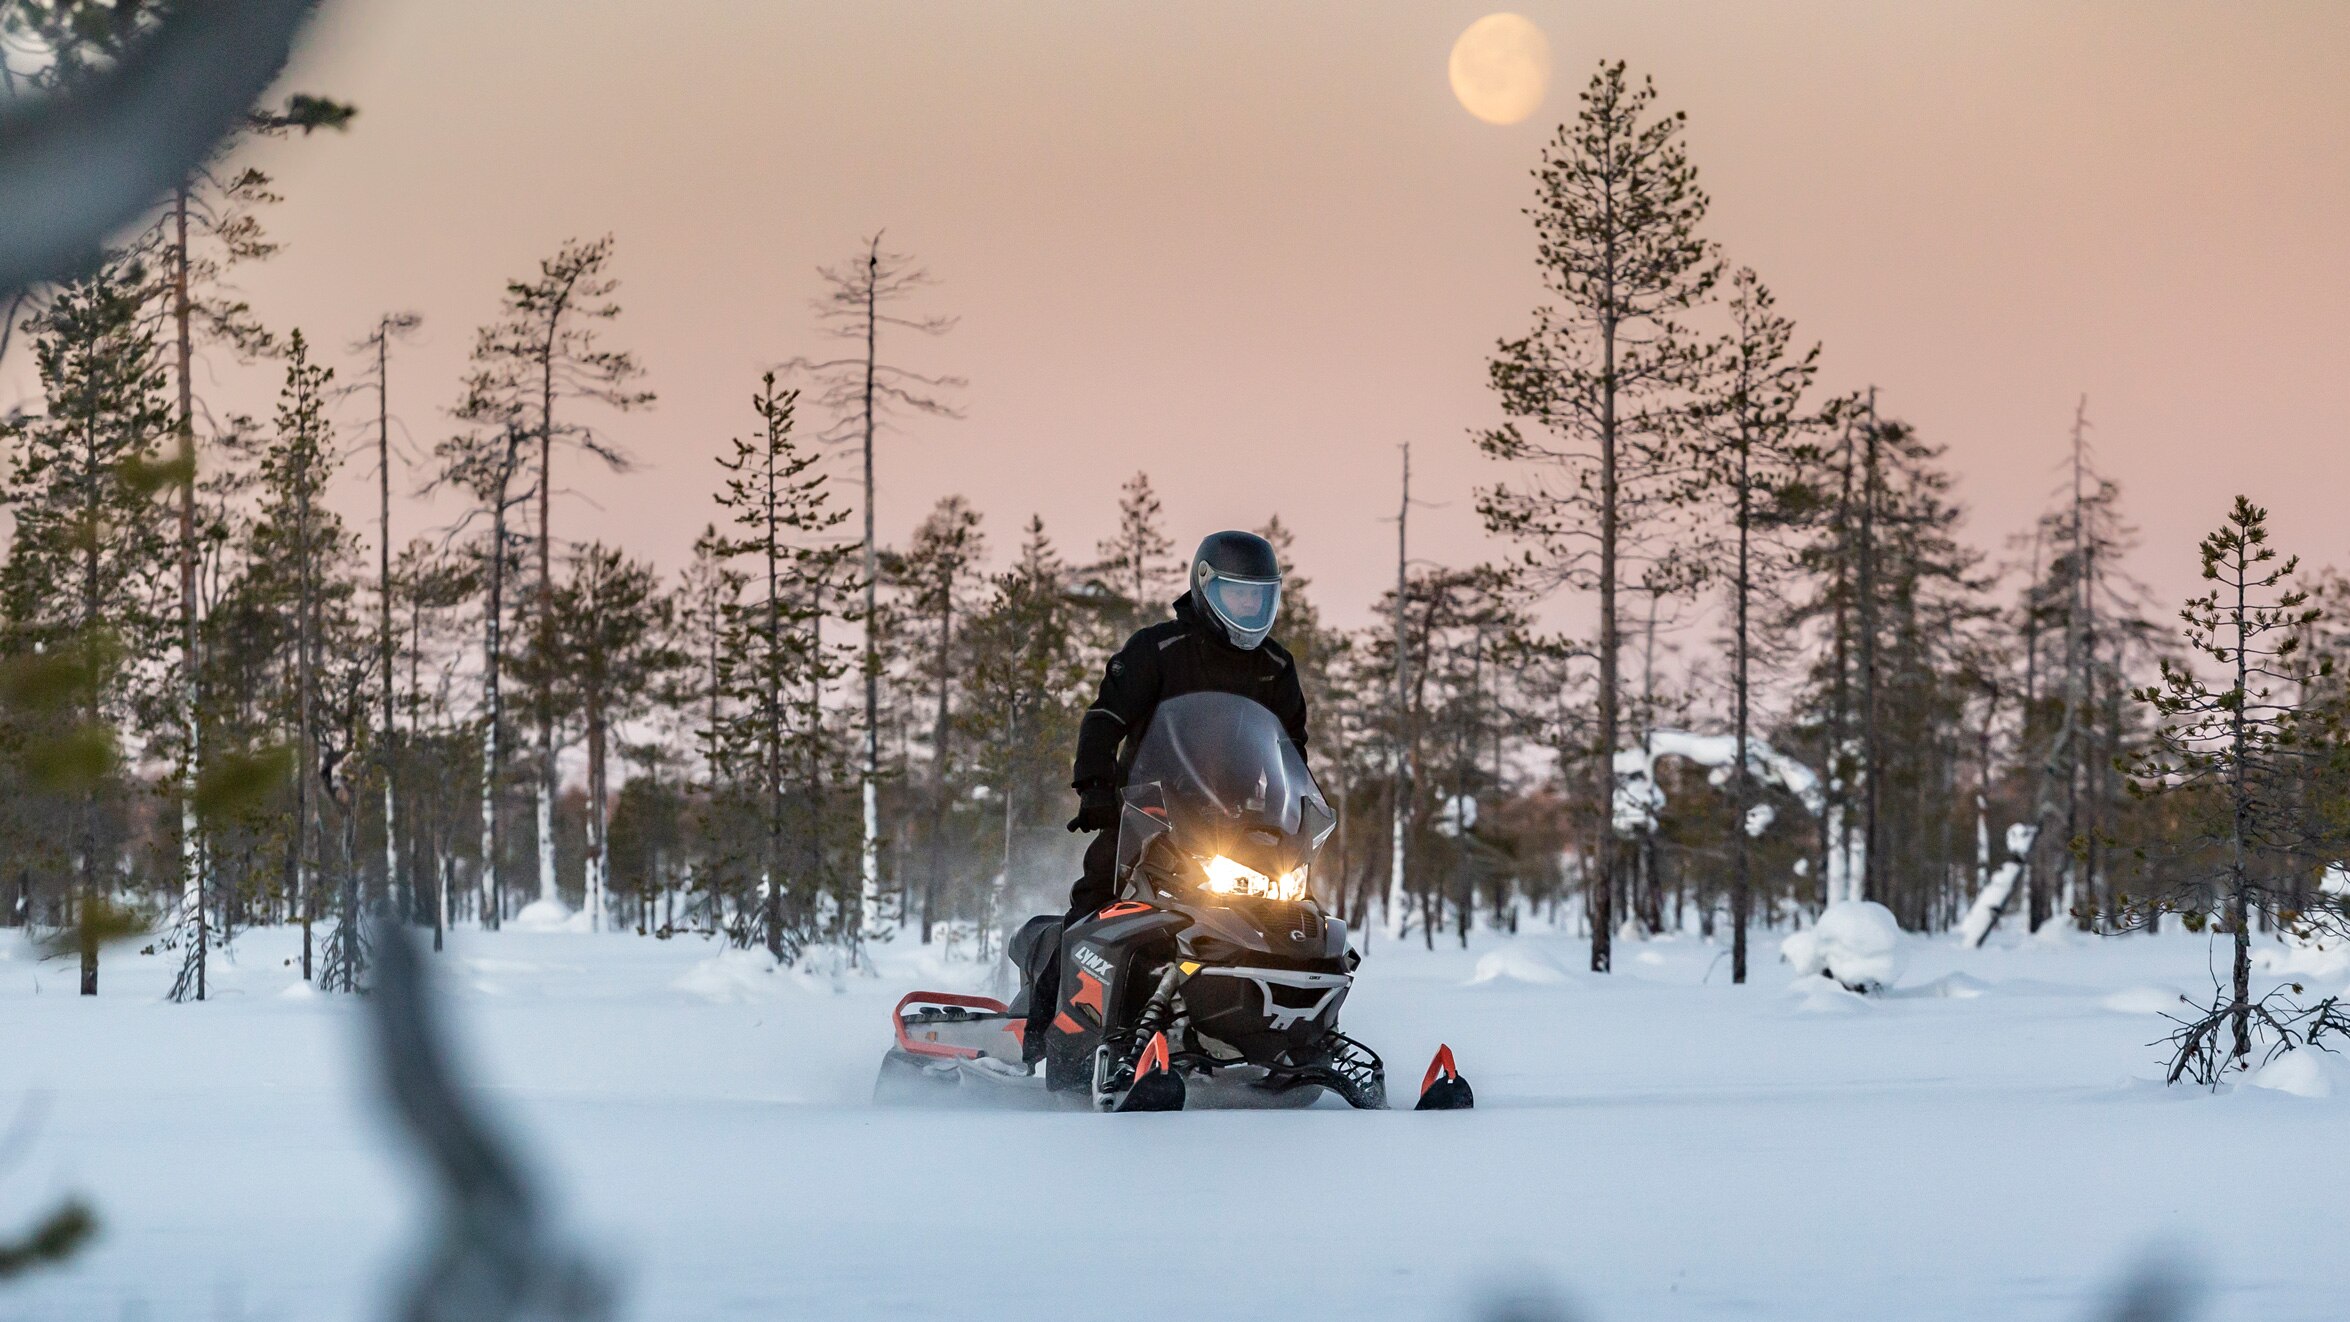 Lynx 49 Ranger PRO snowmobile riding in the forest